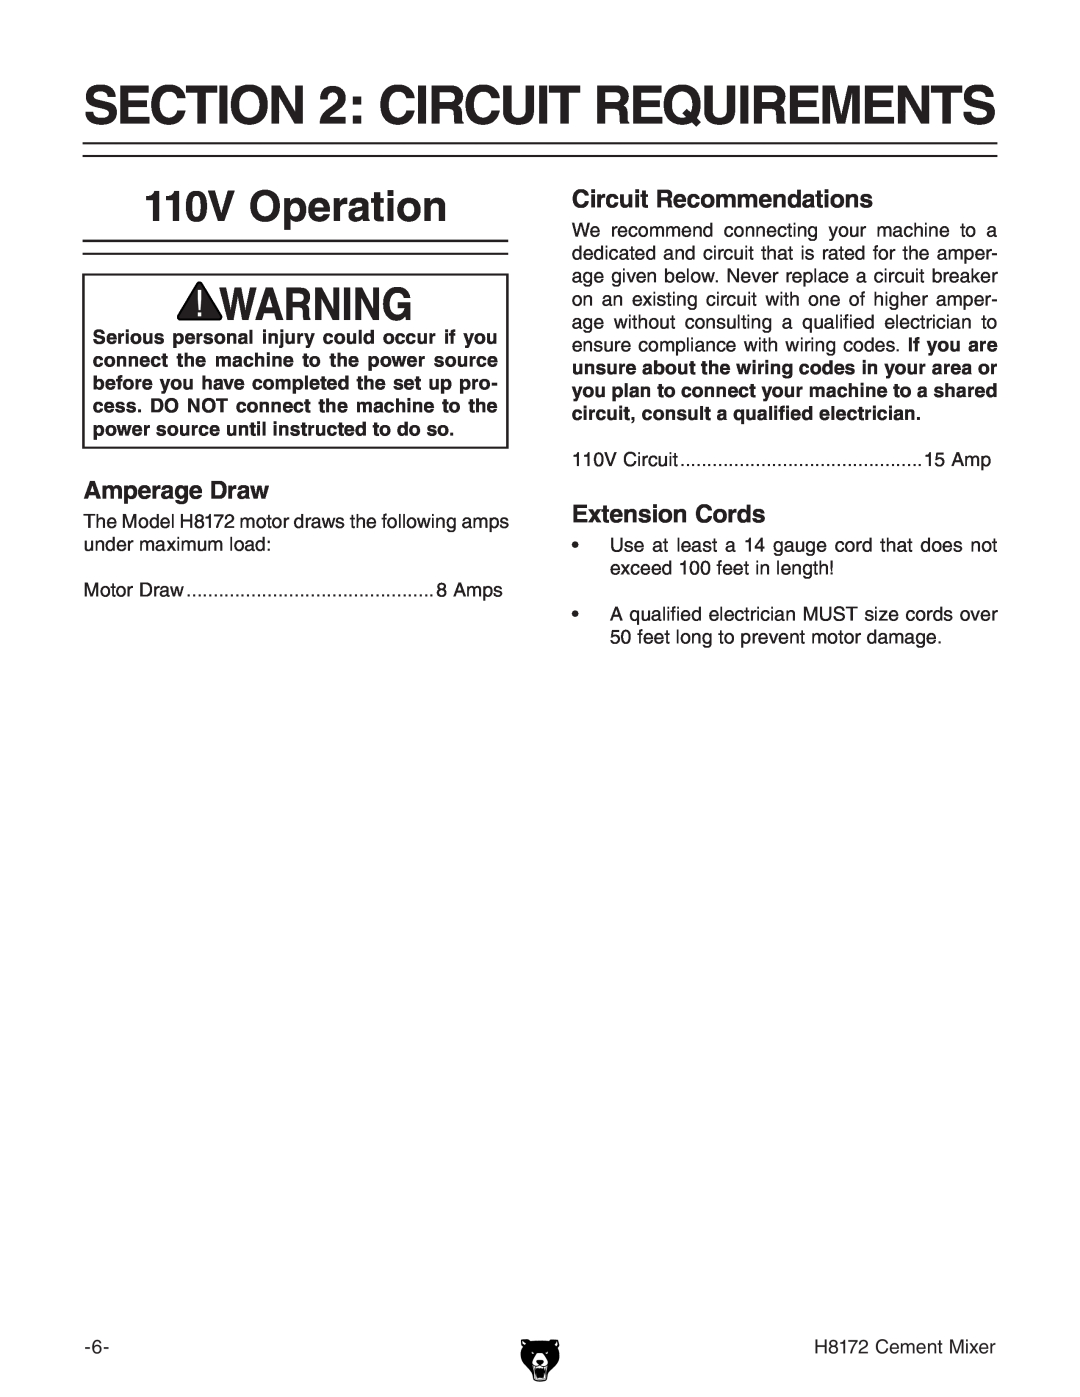 Grizzly H8172 owner manual Circuit Requirements, 110V Operation, Amperage Draw, Circuit Recommendations, Extension Cords 